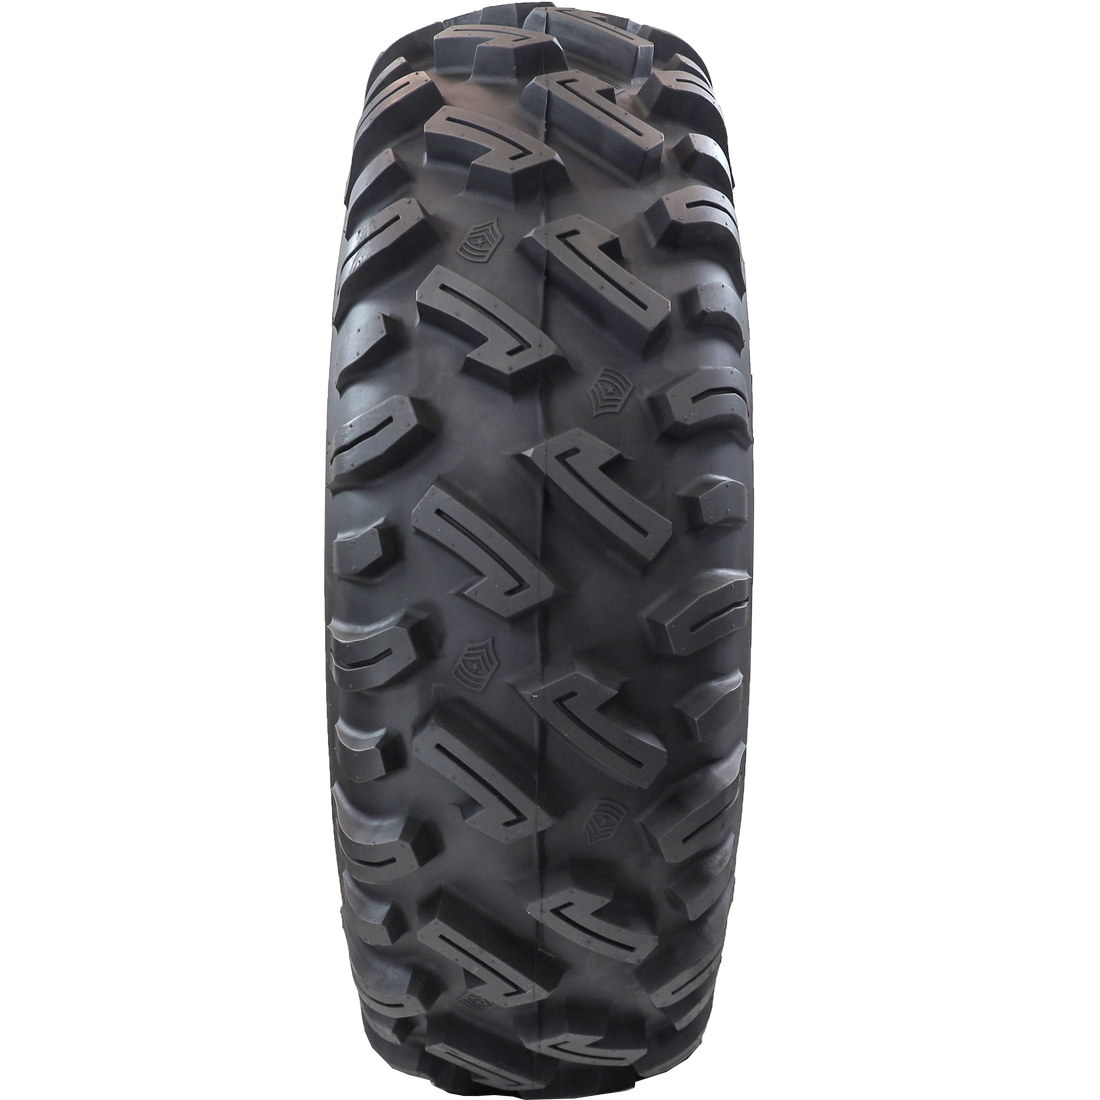 Full frontal view of the Dirt Commander tire, spotlighting its aggressive tread design with deep, robust lugs, optimized for superior traction in ATV and UTV off-road vehicles.